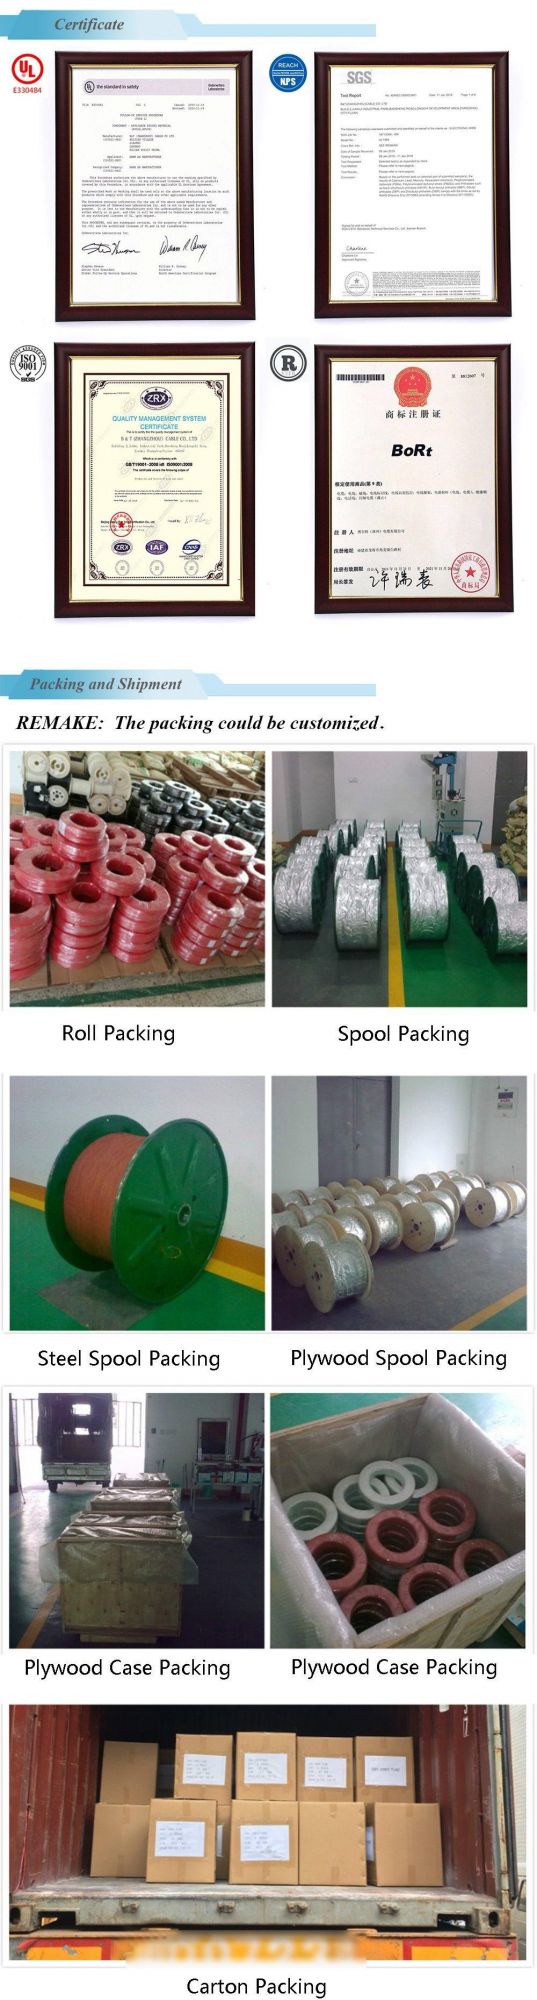 Flry-B Tinned Copper Conductor PVC Insulation Automotive Wire